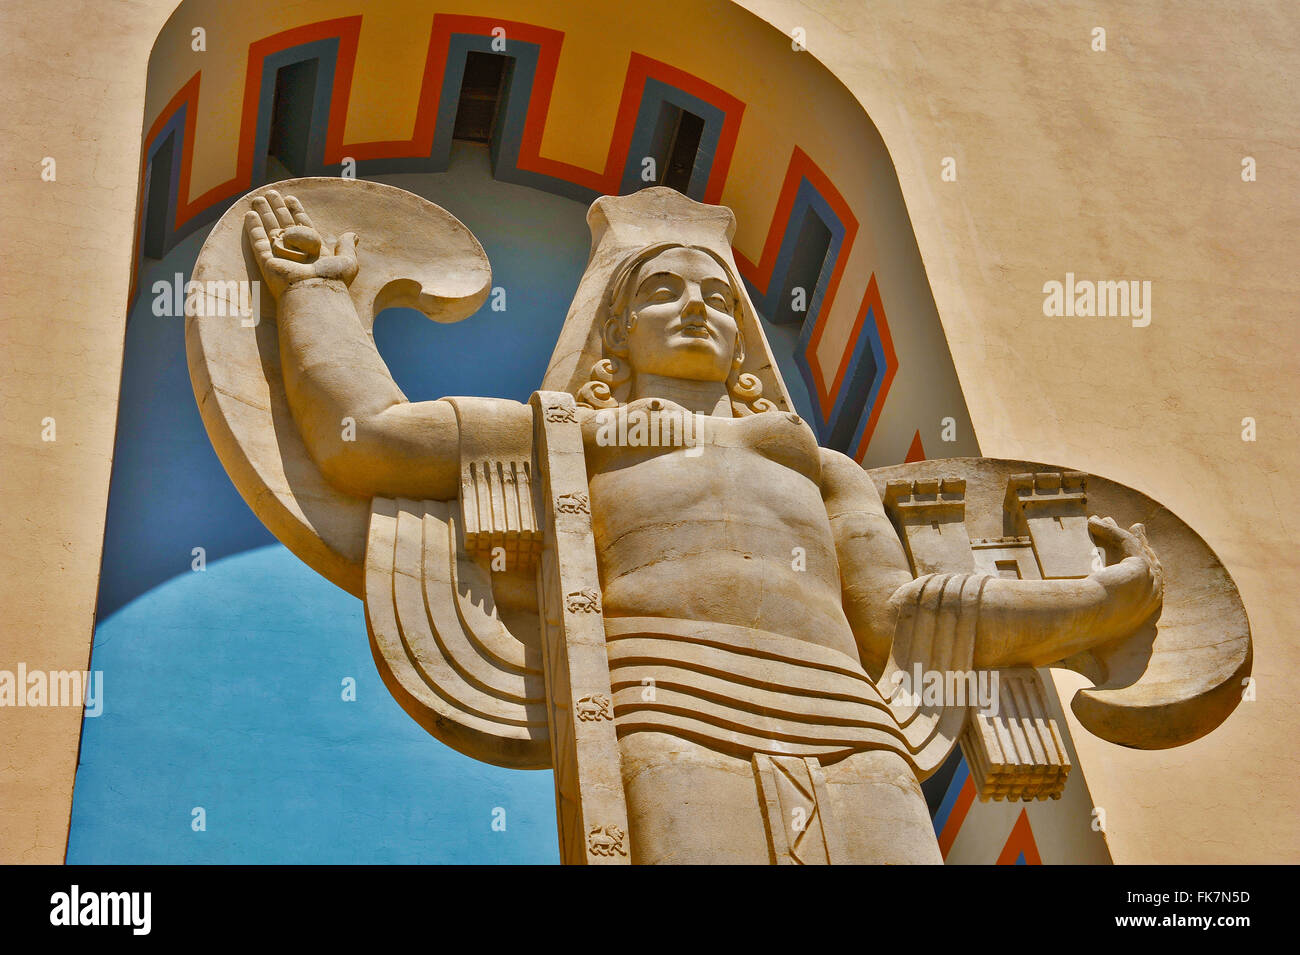 Art Deco Statues at State Fair Grounds, Dallas, Texas Stock Photo